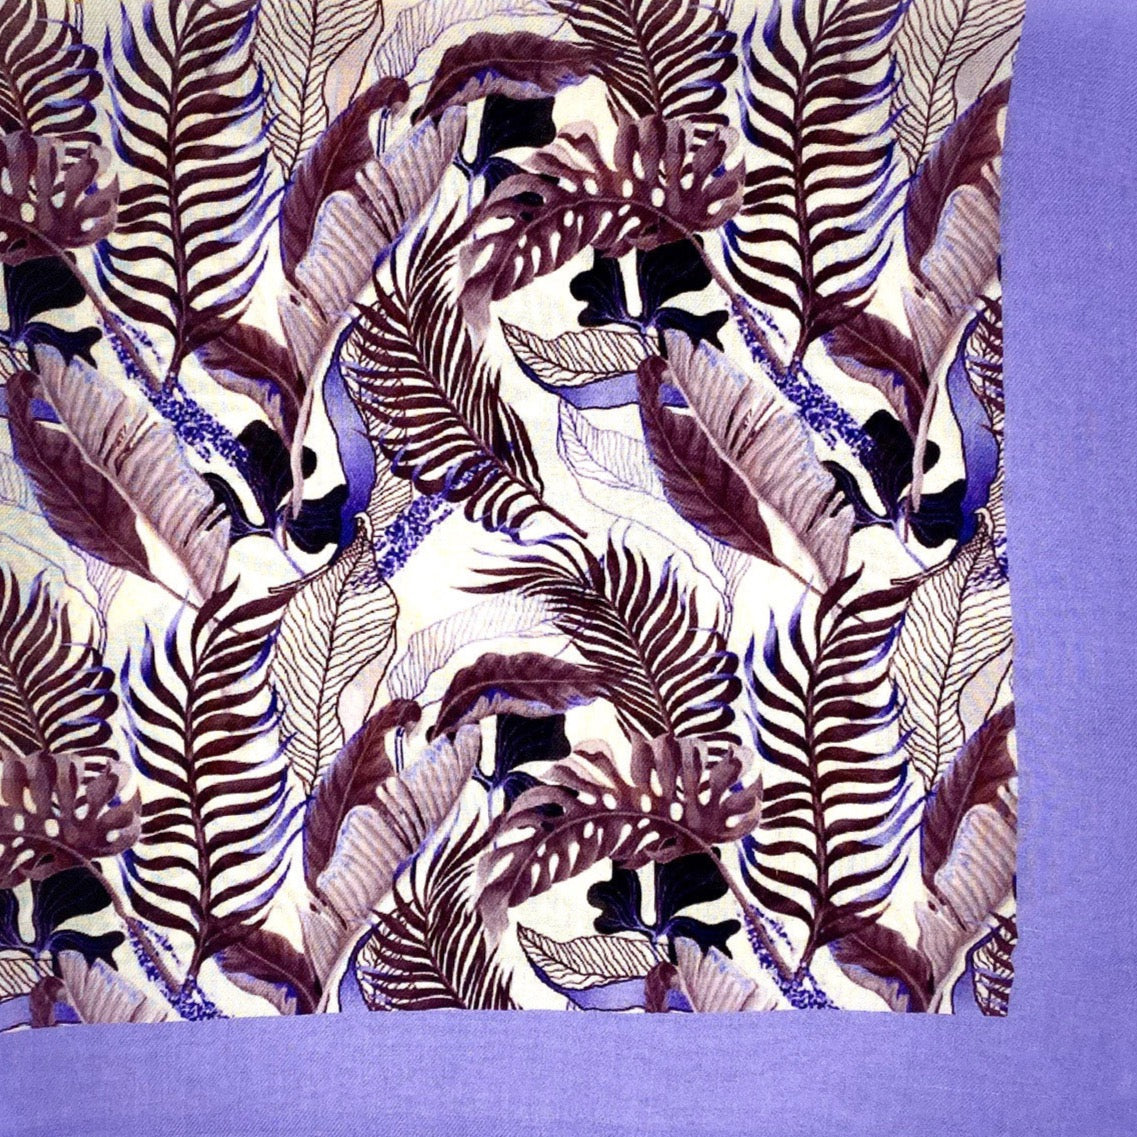 A flat, folded view of 'The Andes' bandana. The pattern is comprised of leaf and foliage shapes in various maroon and purple shades against a violet border.